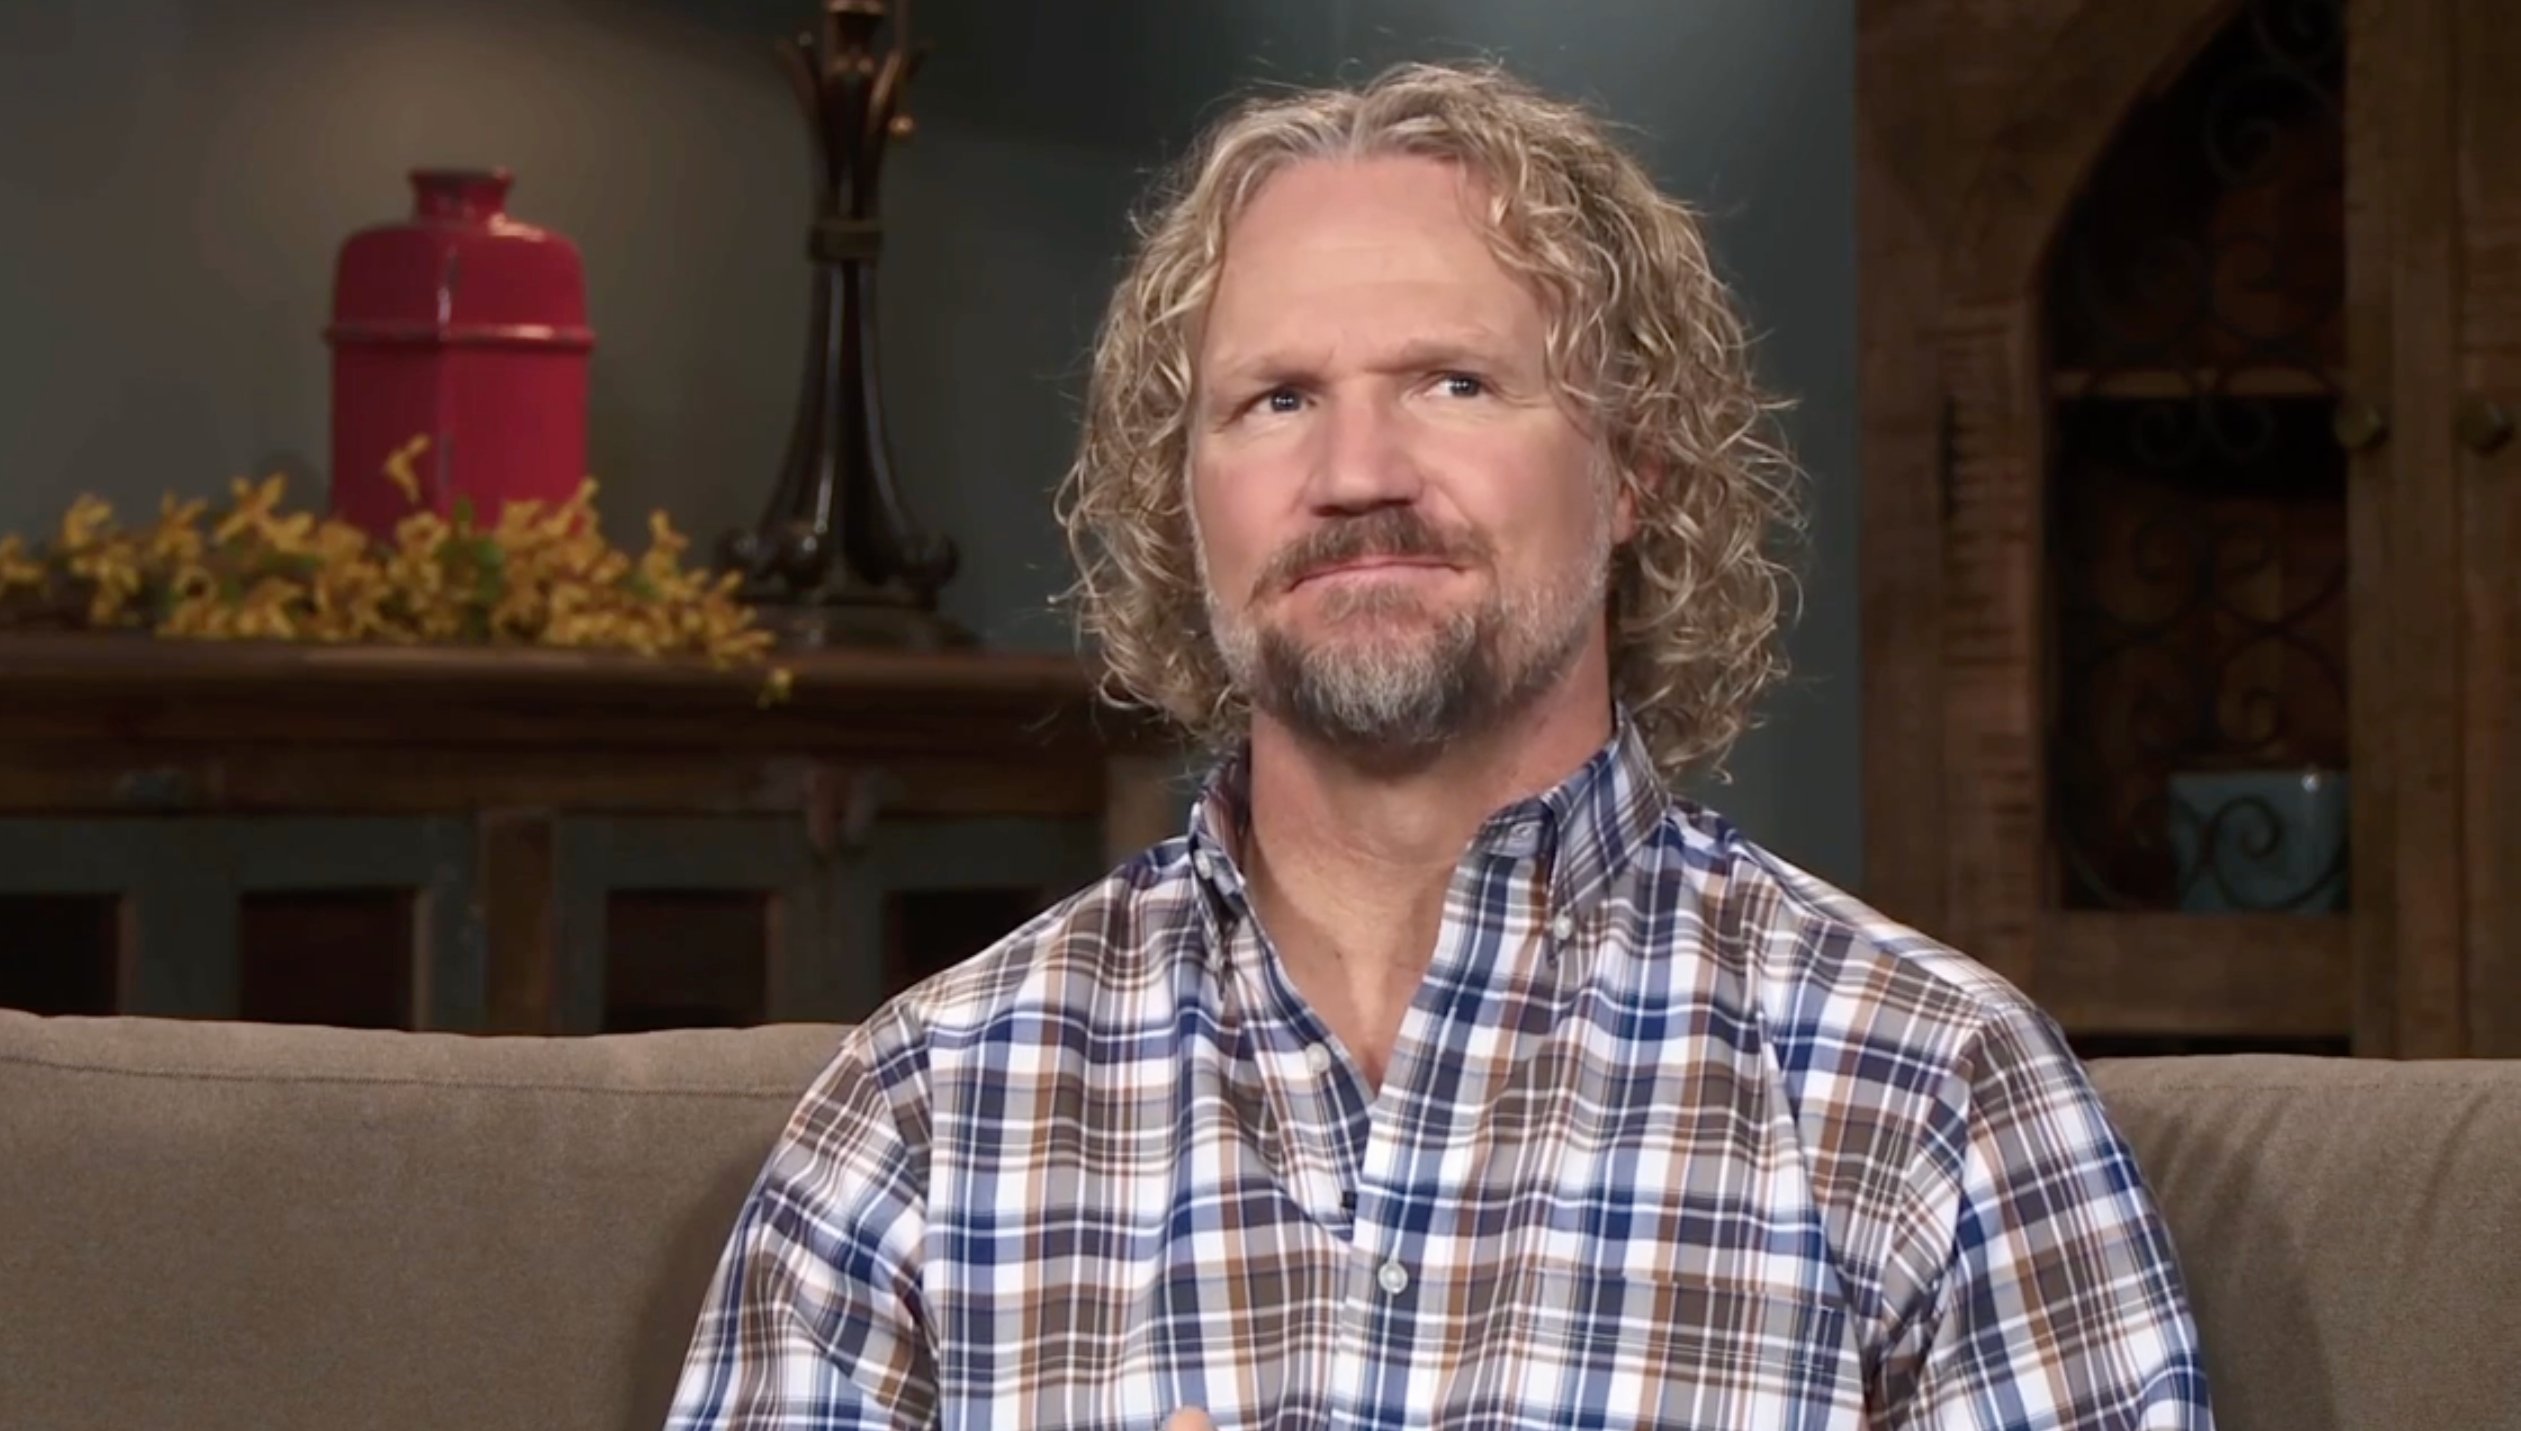 Kody Brown in a confessional on 'Sister Wives' Season 16